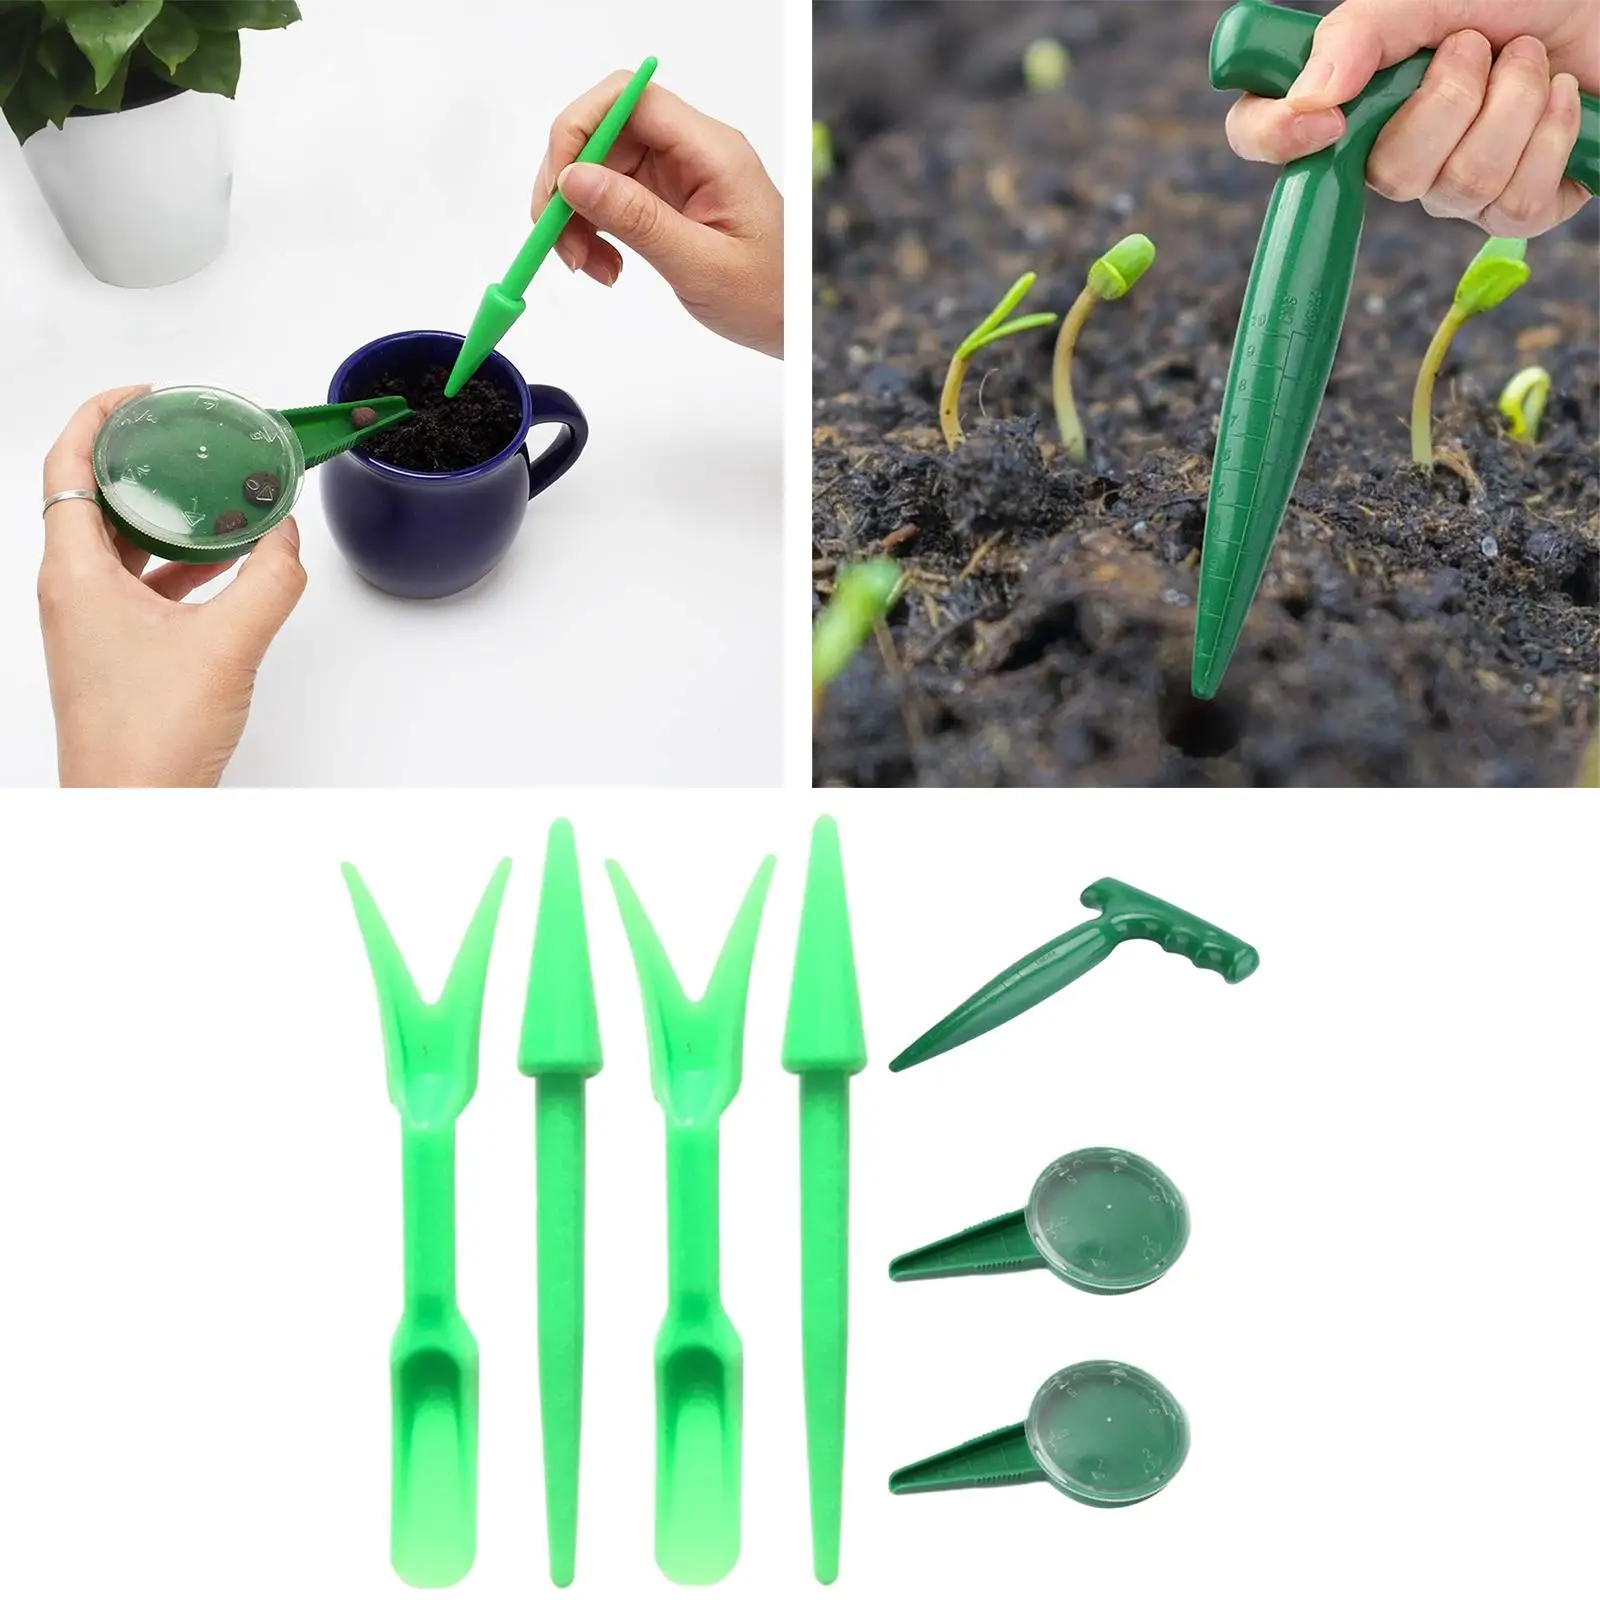 7x Seeding Tool Set Supplies Handheld Seed Planter Tool for Outdoor Planting Vegetables Indoor Garden Plant Pot Tool Sets Farm